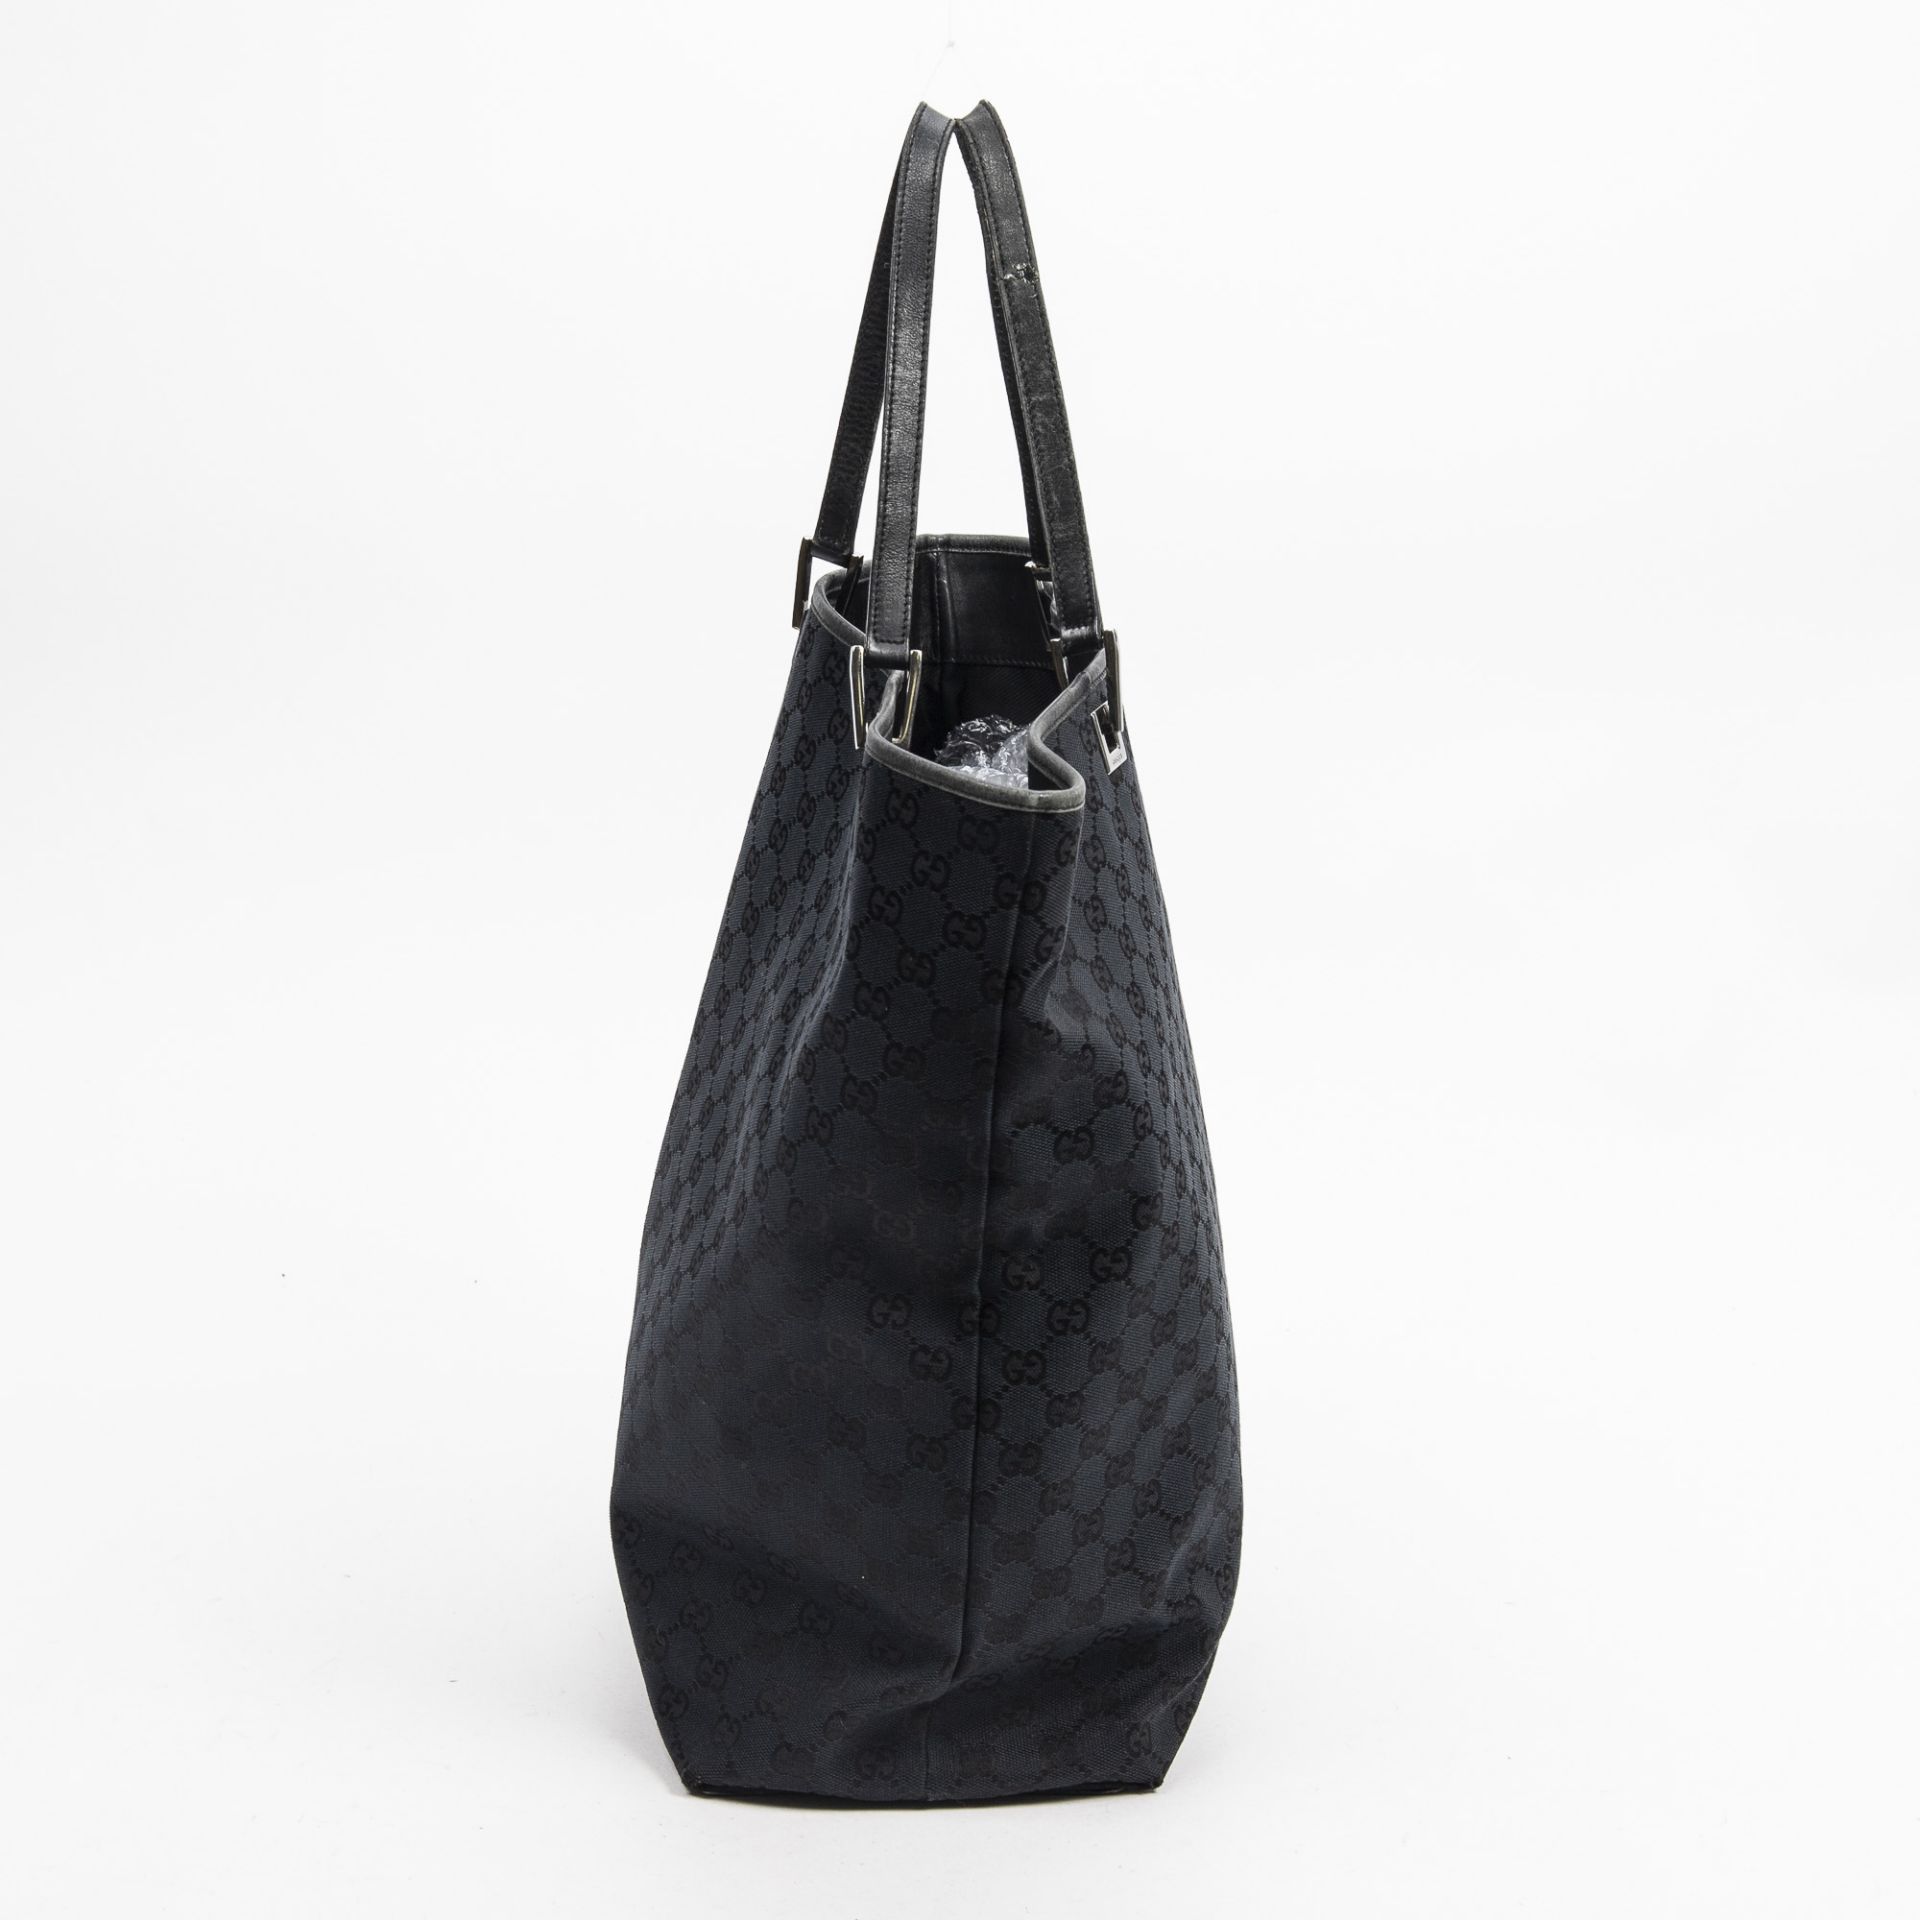 RRP £880.00 Lot To Contain 1 Gucci Canvas Large Shopping Tote Shoulder Bag In Black - 29*39*15cm - - Image 4 of 4